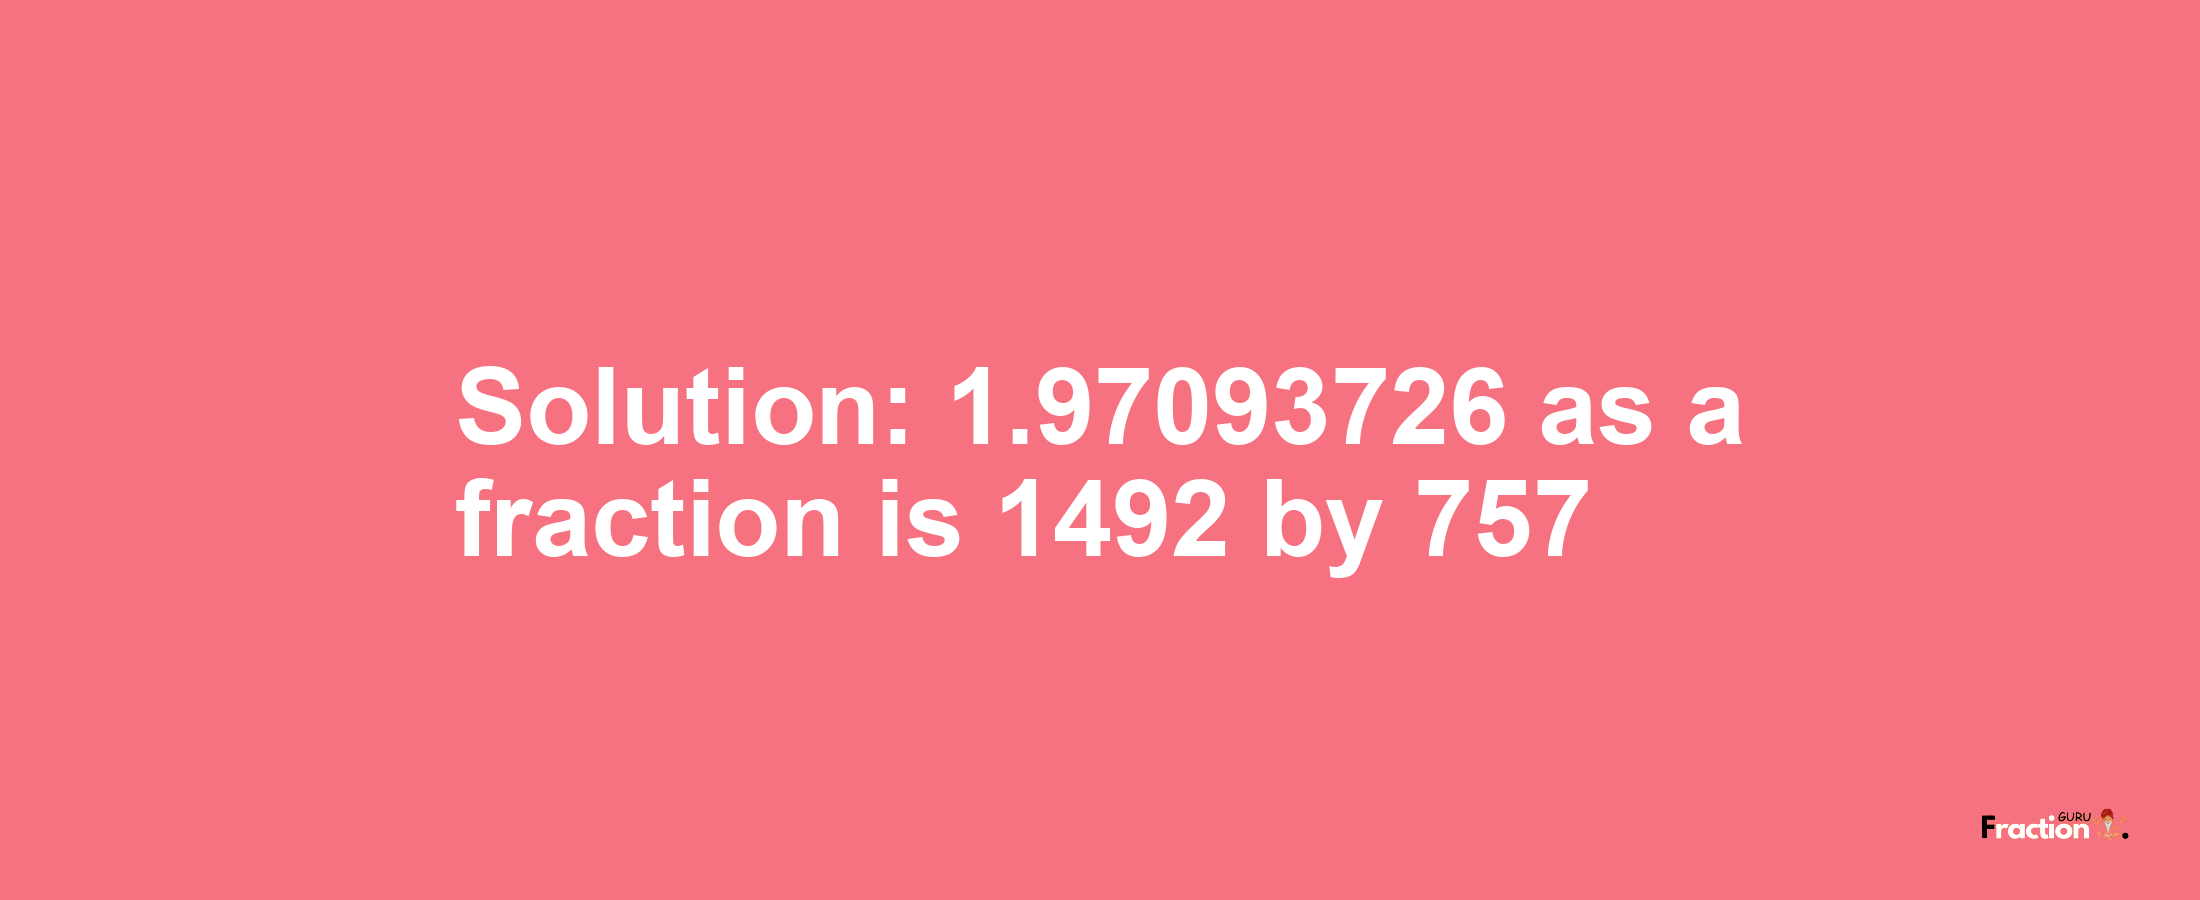 Solution:1.97093726 as a fraction is 1492/757